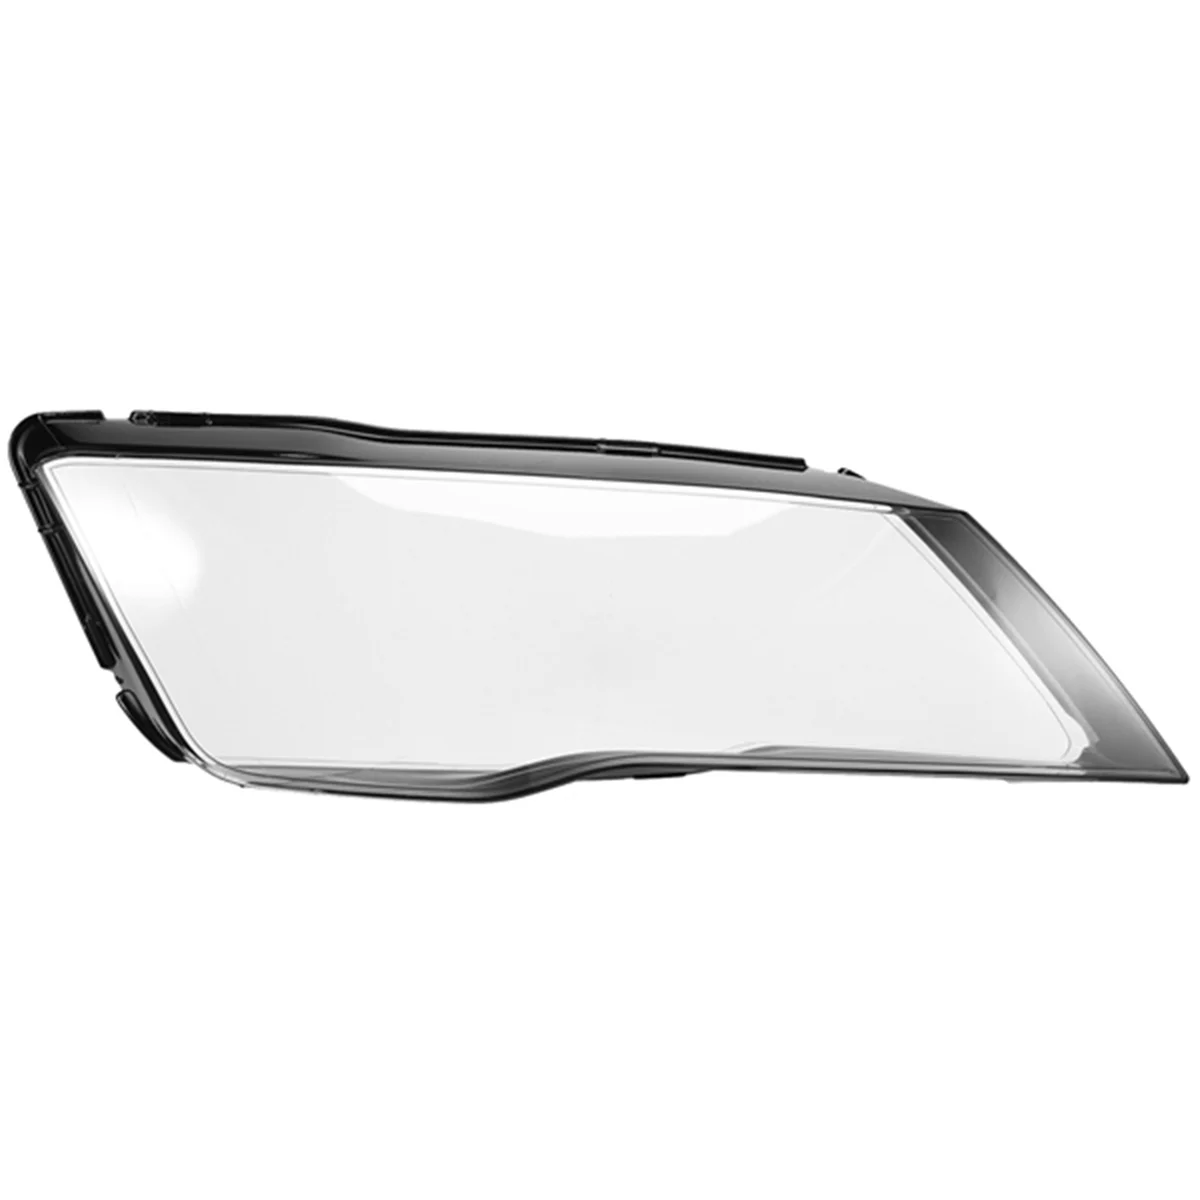 

Car Headlight Cover Transparent Lamp Shade Headlight Shell Lens Lampshade for Audi A7 2011-2014 Right